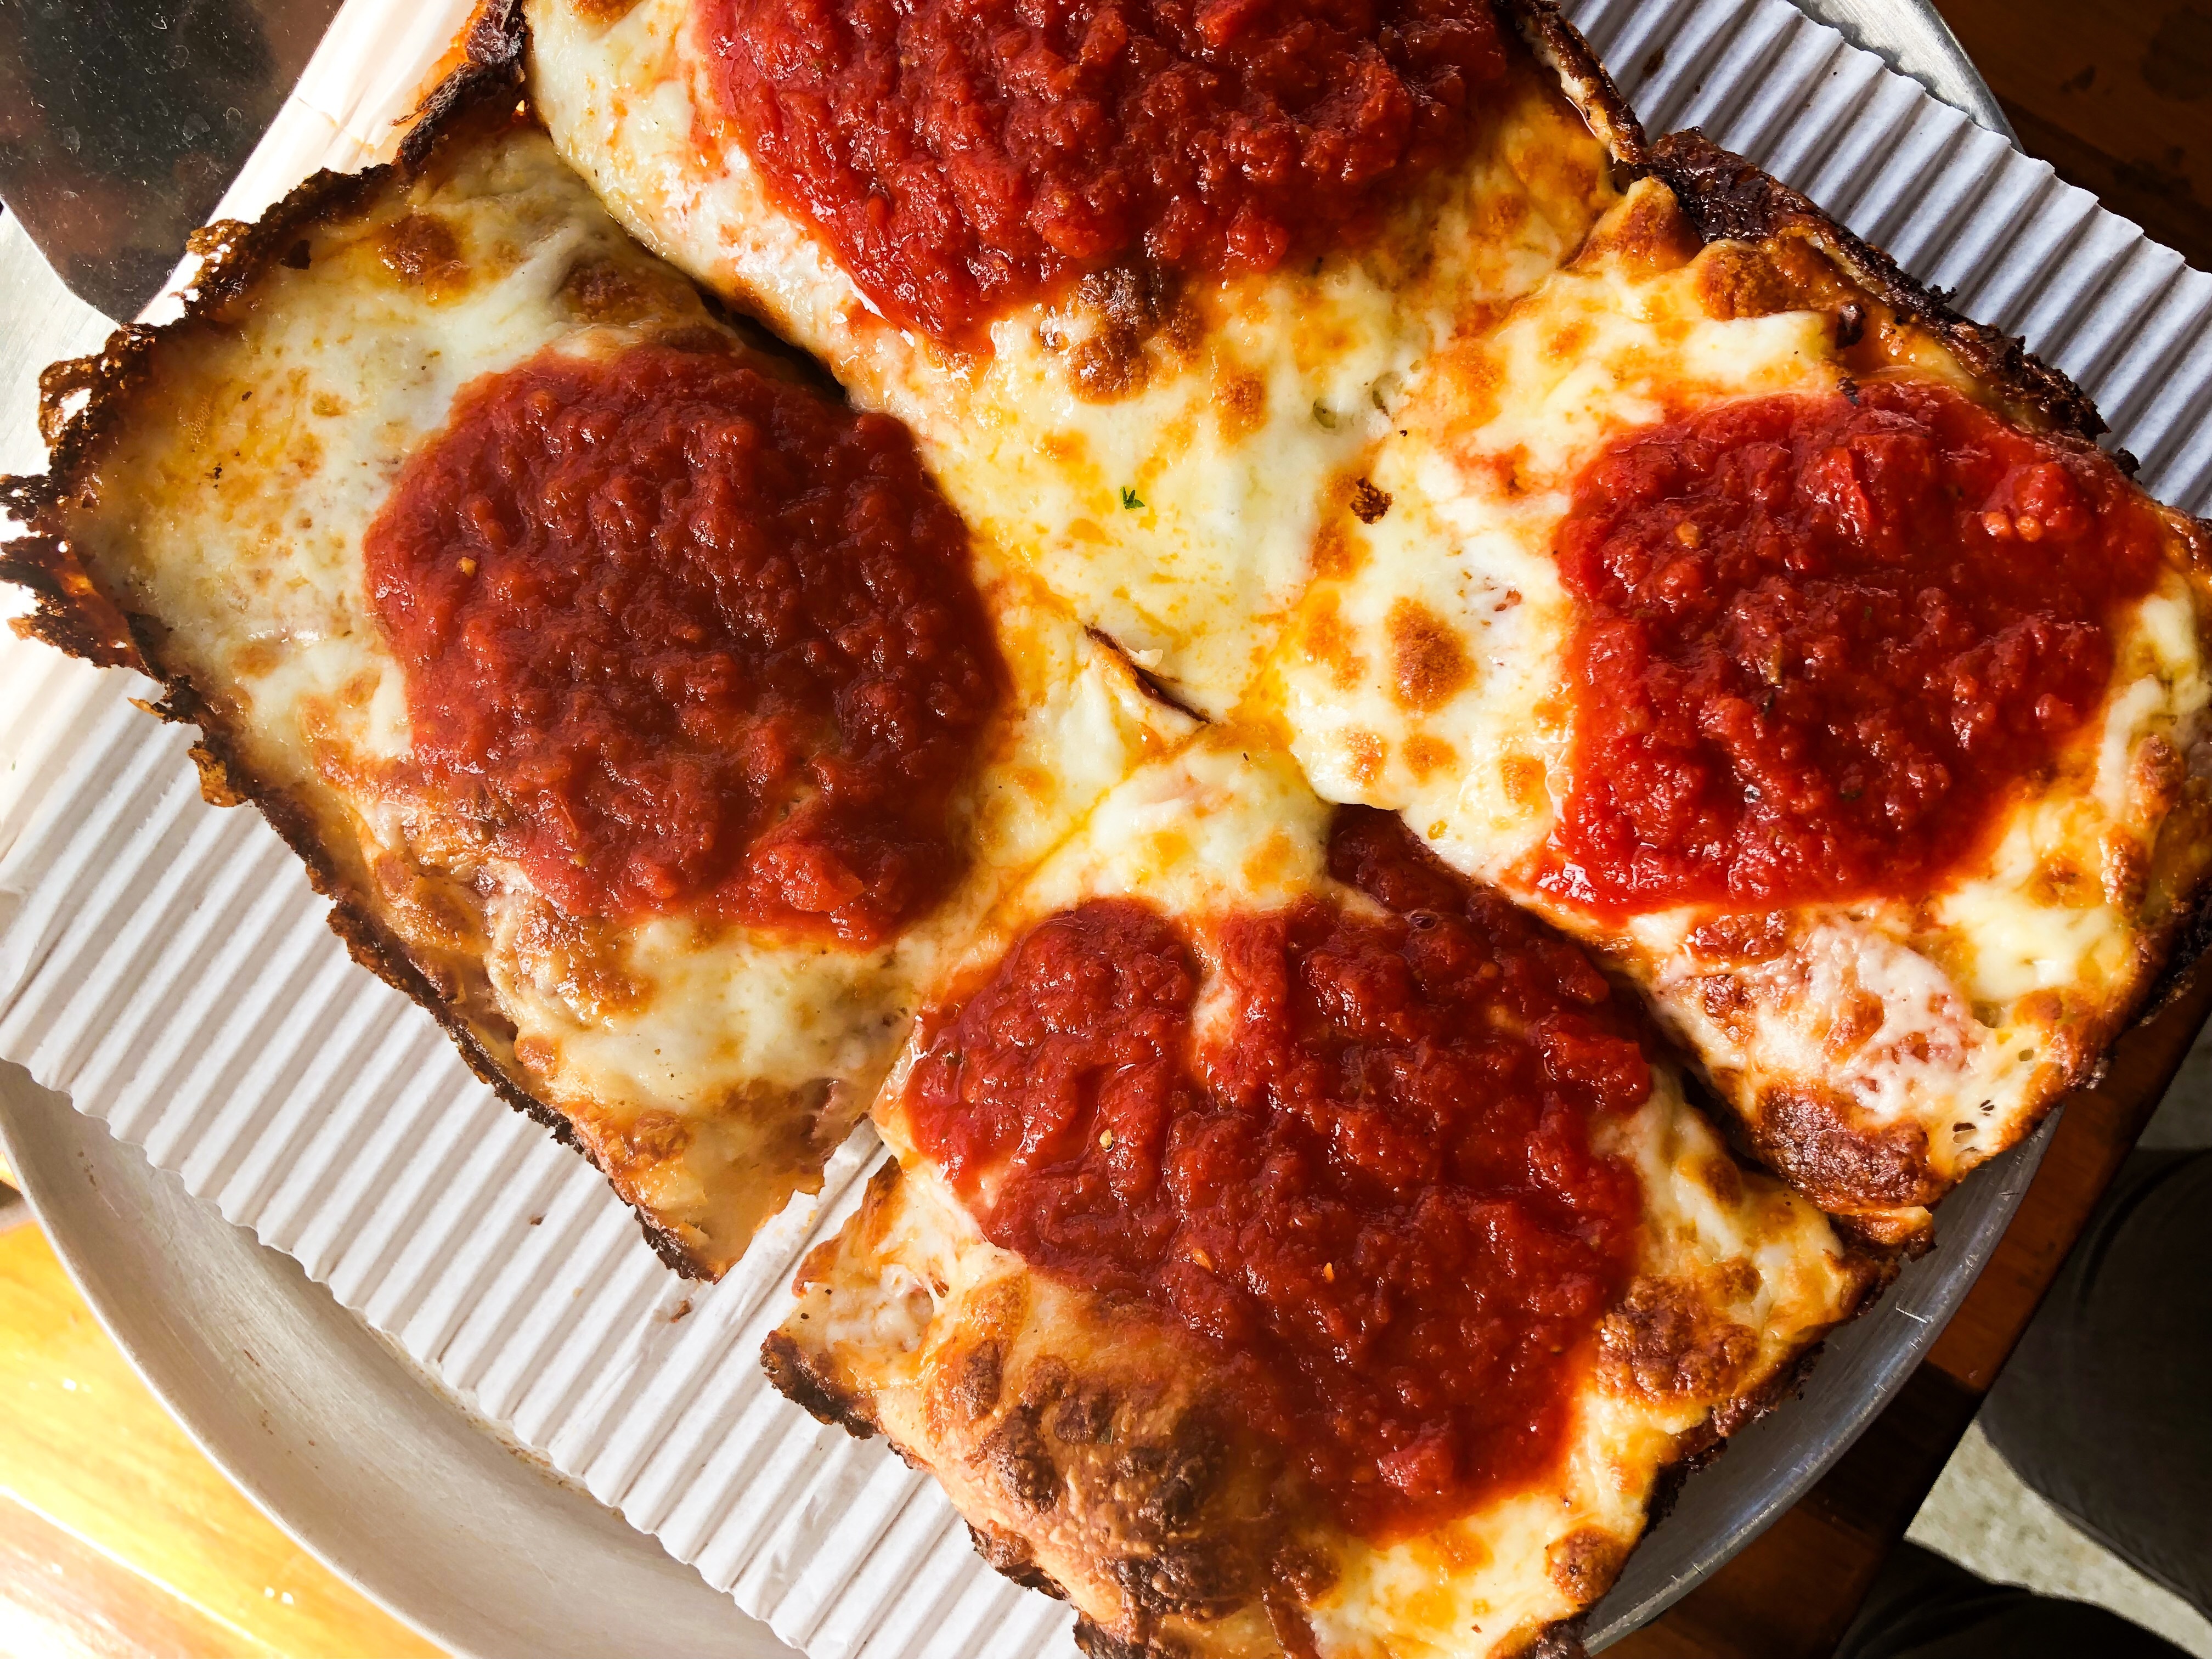 A Detroit-style pizza from Assembly Brewing, with dollops of brick-red tomato sauce.